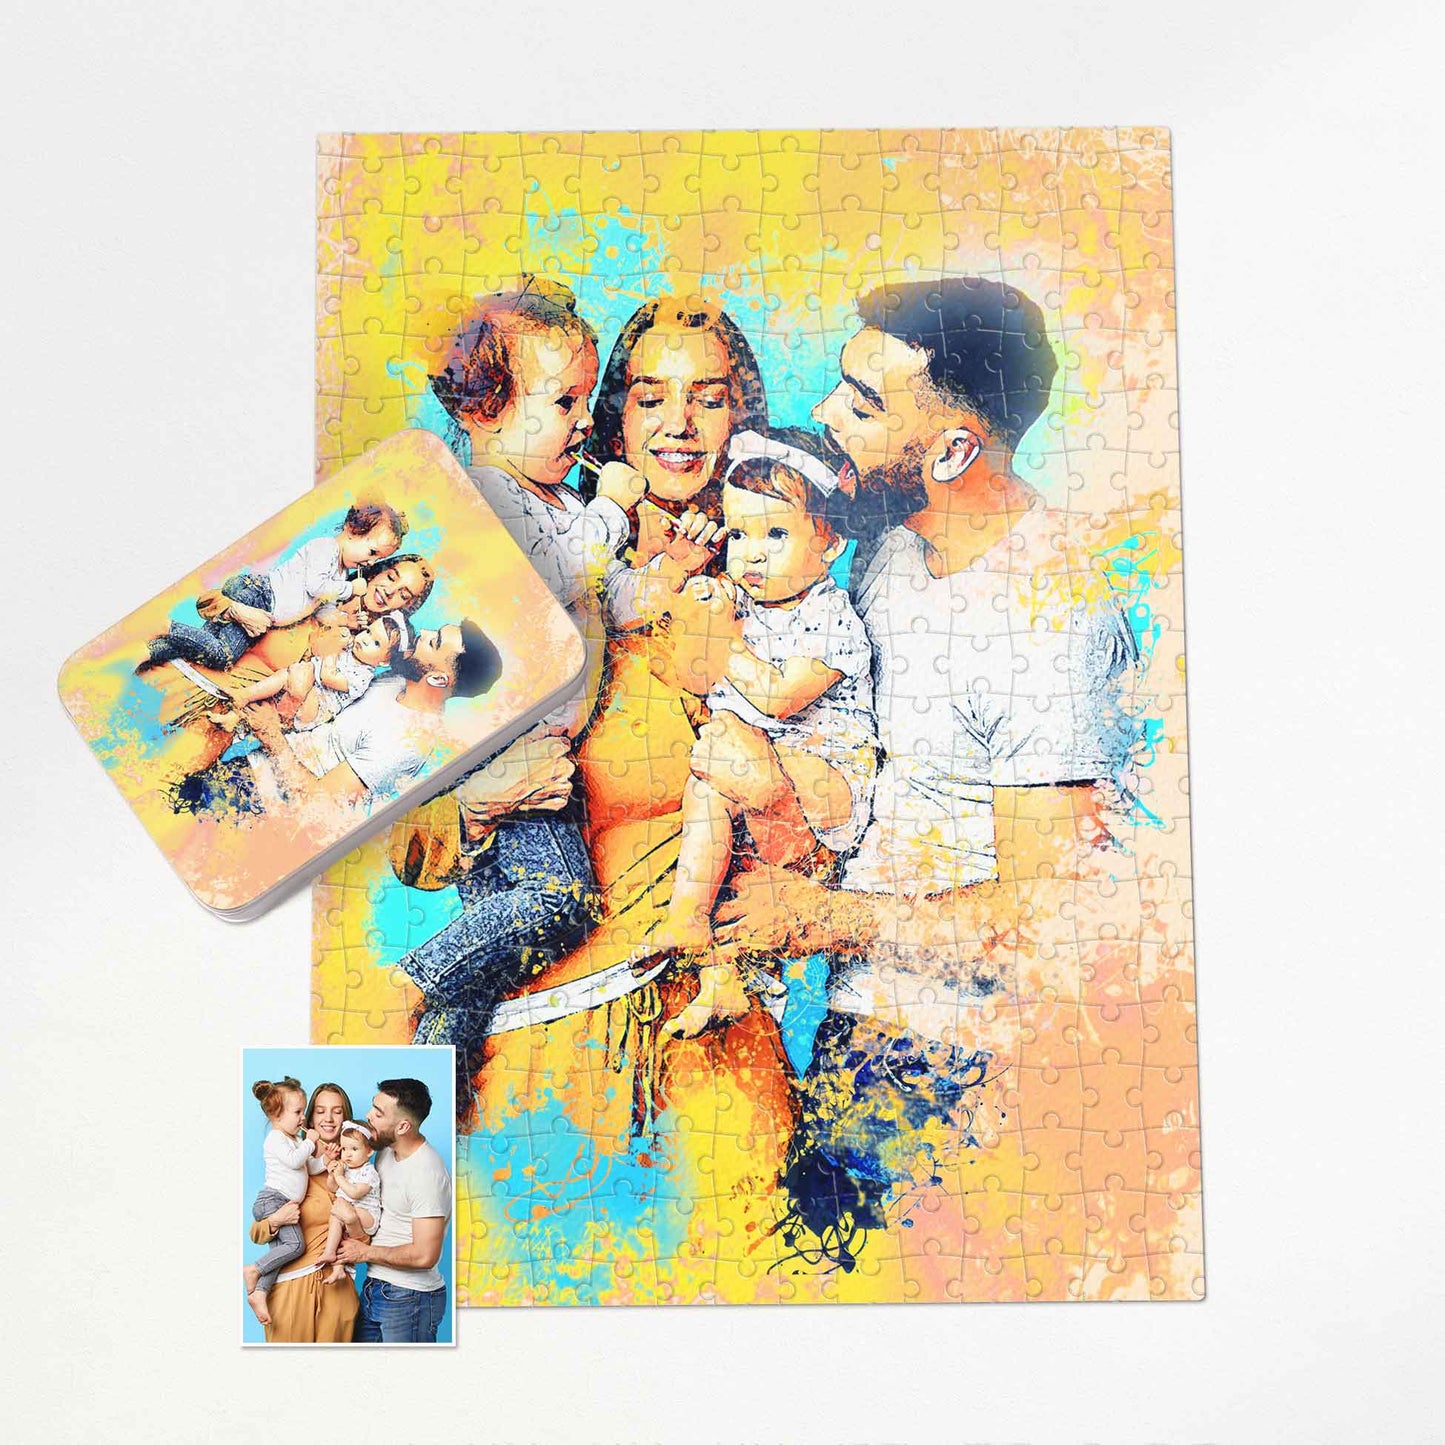 Transform your memories into a work of art with our Personalised Watercolor Splash Jigsaw Puzzle. This handmade wonder, printed from your photo, adds a touch of happiness to anniversaries and birthdays